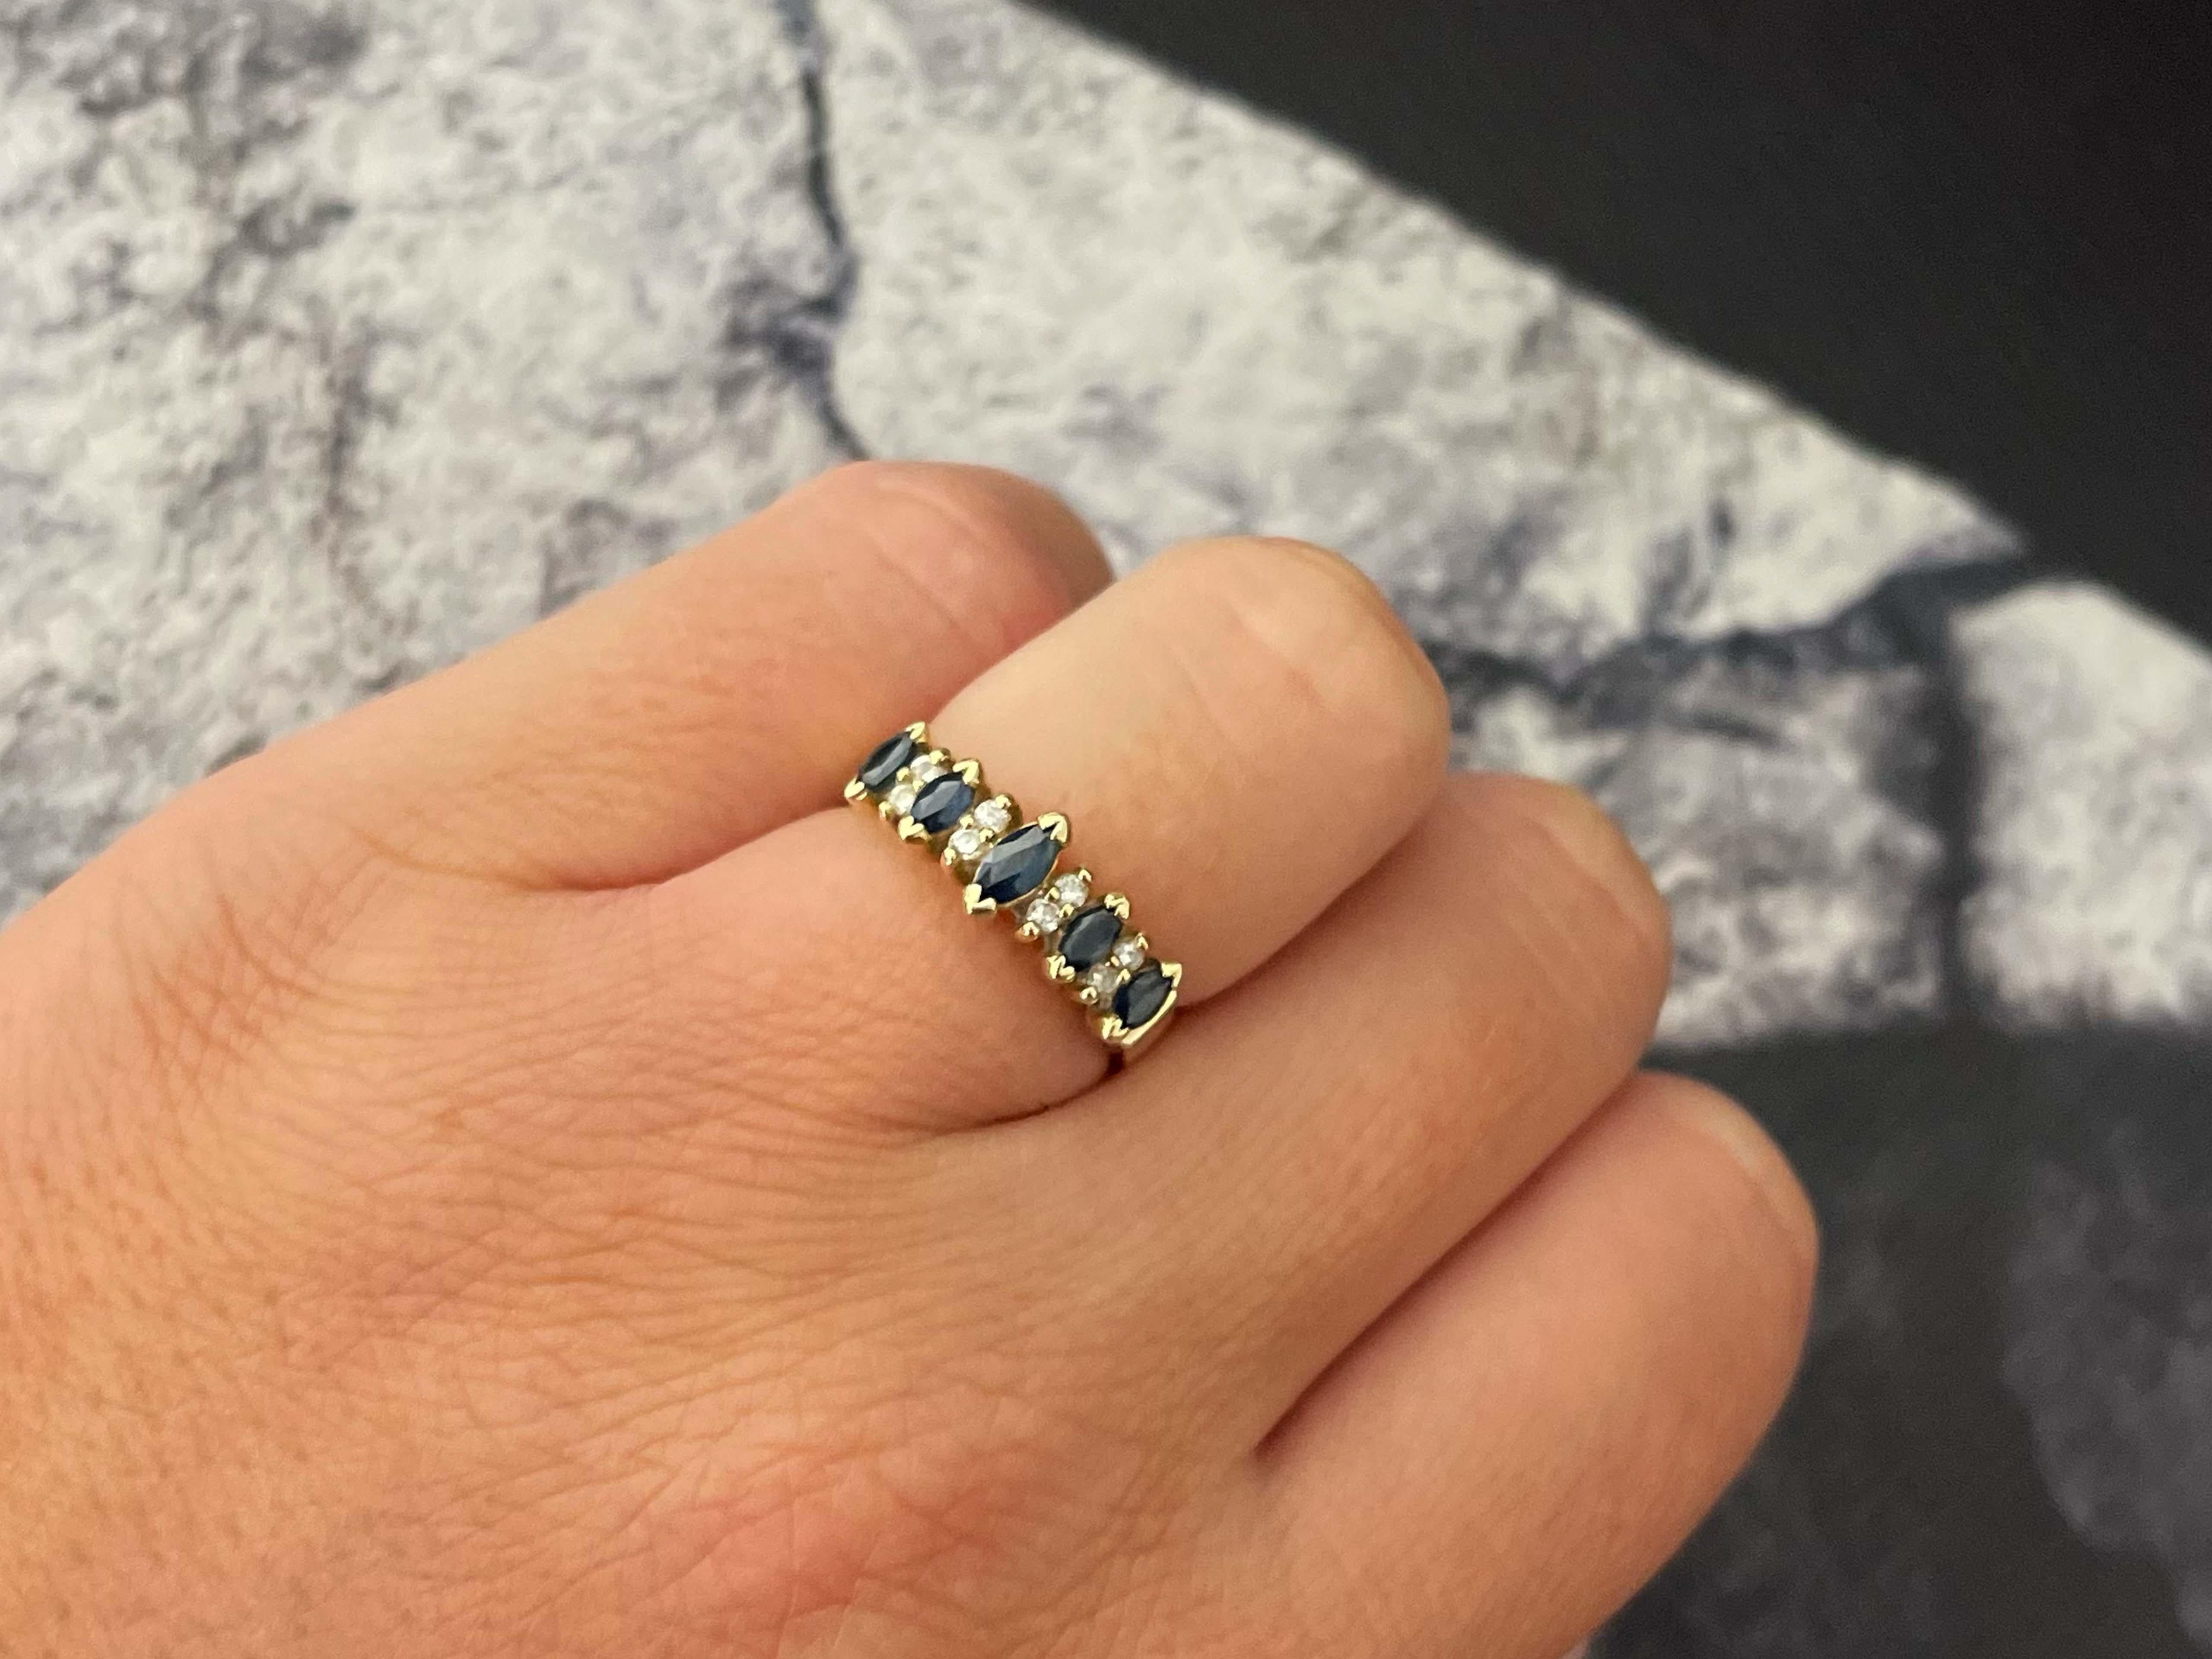 Item Specifications:

Metal: 14K Yellow Gold

Style: Statement Ring

Ring Size: 5.5 (resizing available for a fee)

Total Weight: 3.2 Grams

Diamond Count: 8

Diamond Carat Weight: 0.05

Diamond Color: G

Diamond Clarity: SI

Gemstone